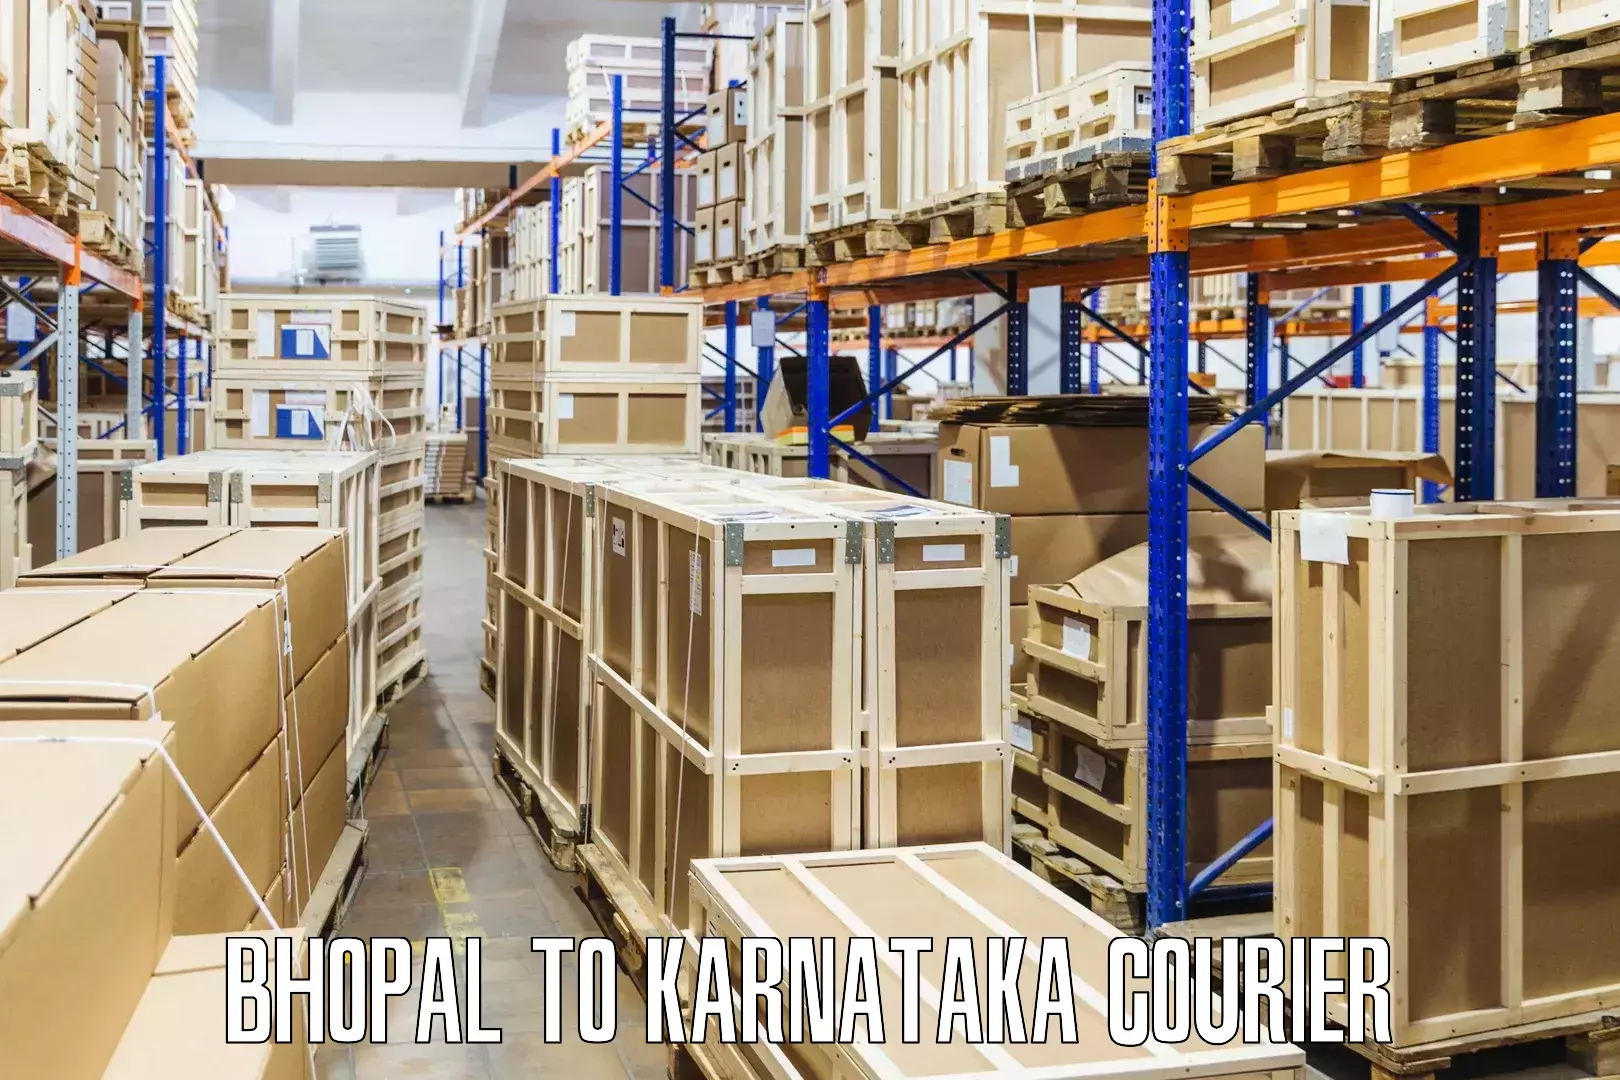 Package delivery network Bhopal to Karnataka